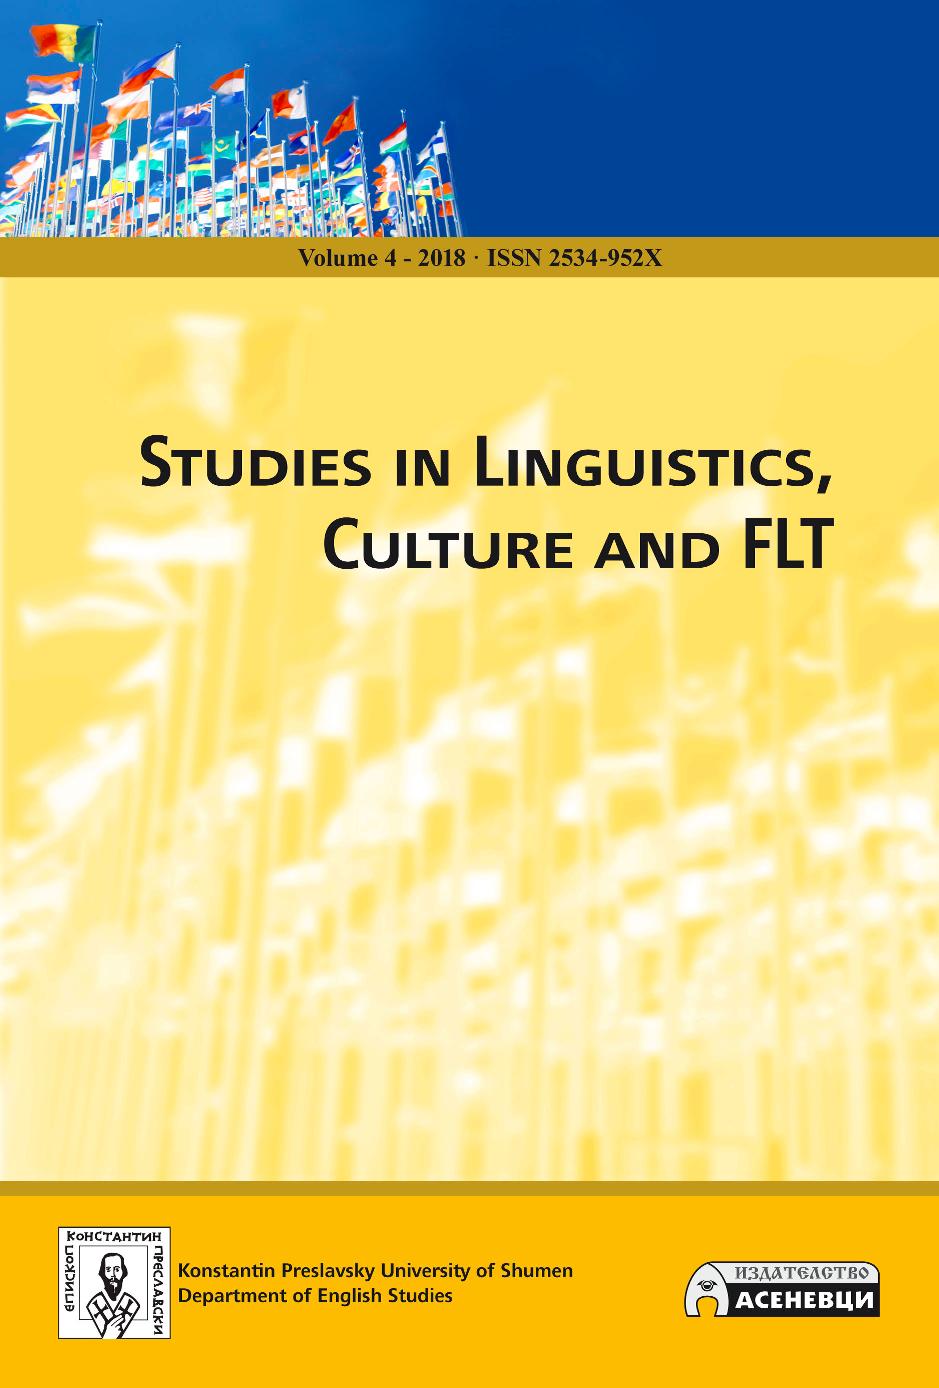 A Cognitive And Cross-Cultural Study On Body Part Terms In English And Turkish Colour Idioms